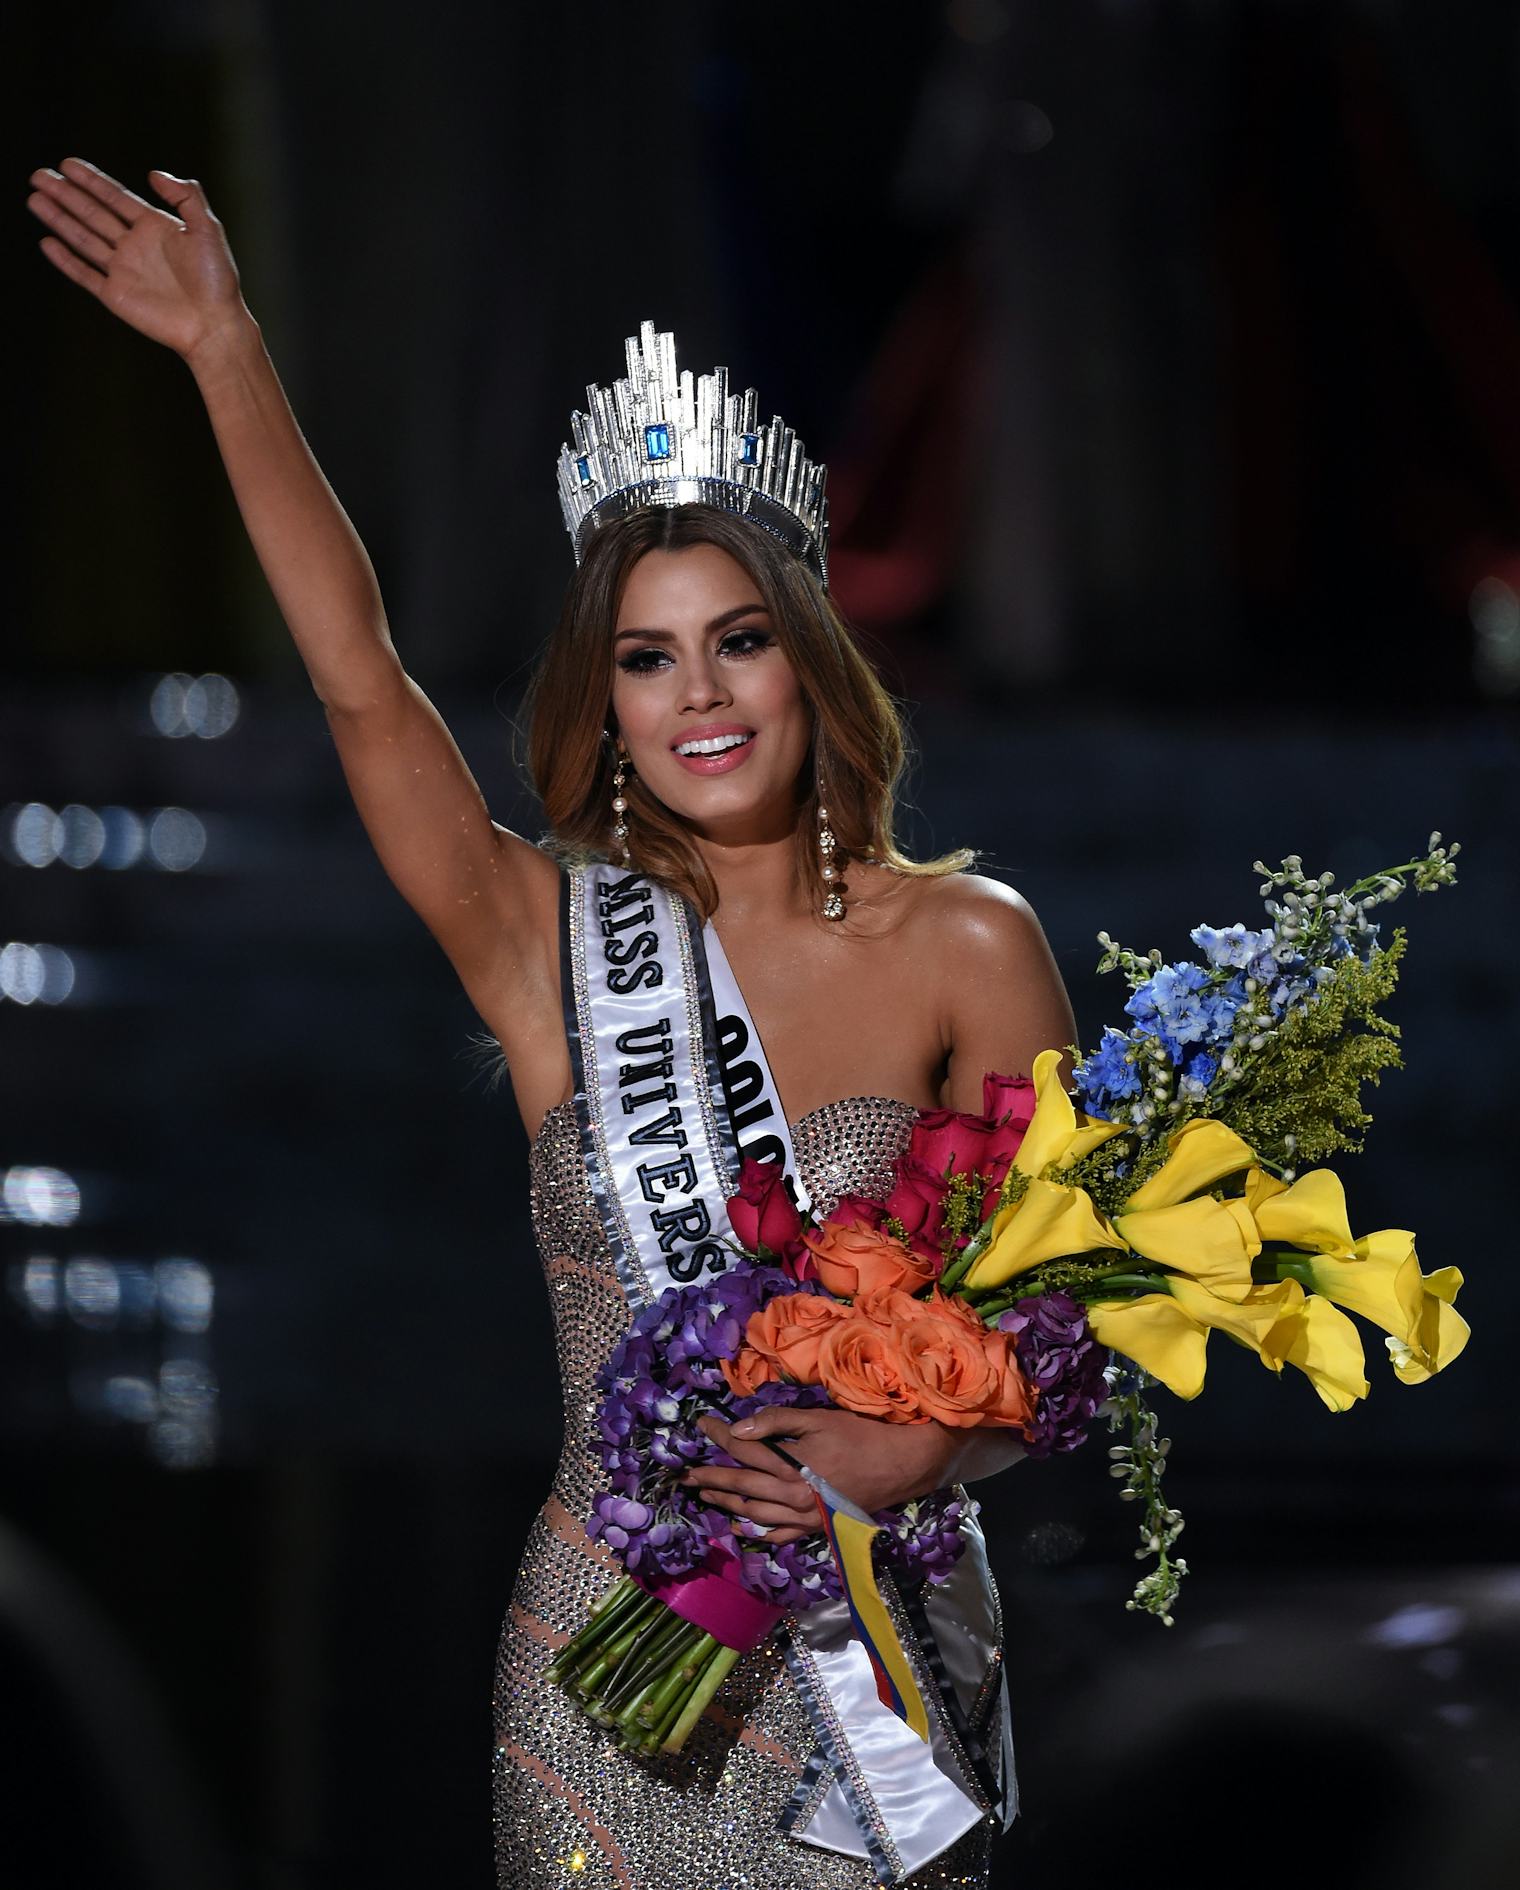 Who Is Ariadna Gutierrez? 8 Things To Know About The Miss Universe 2015